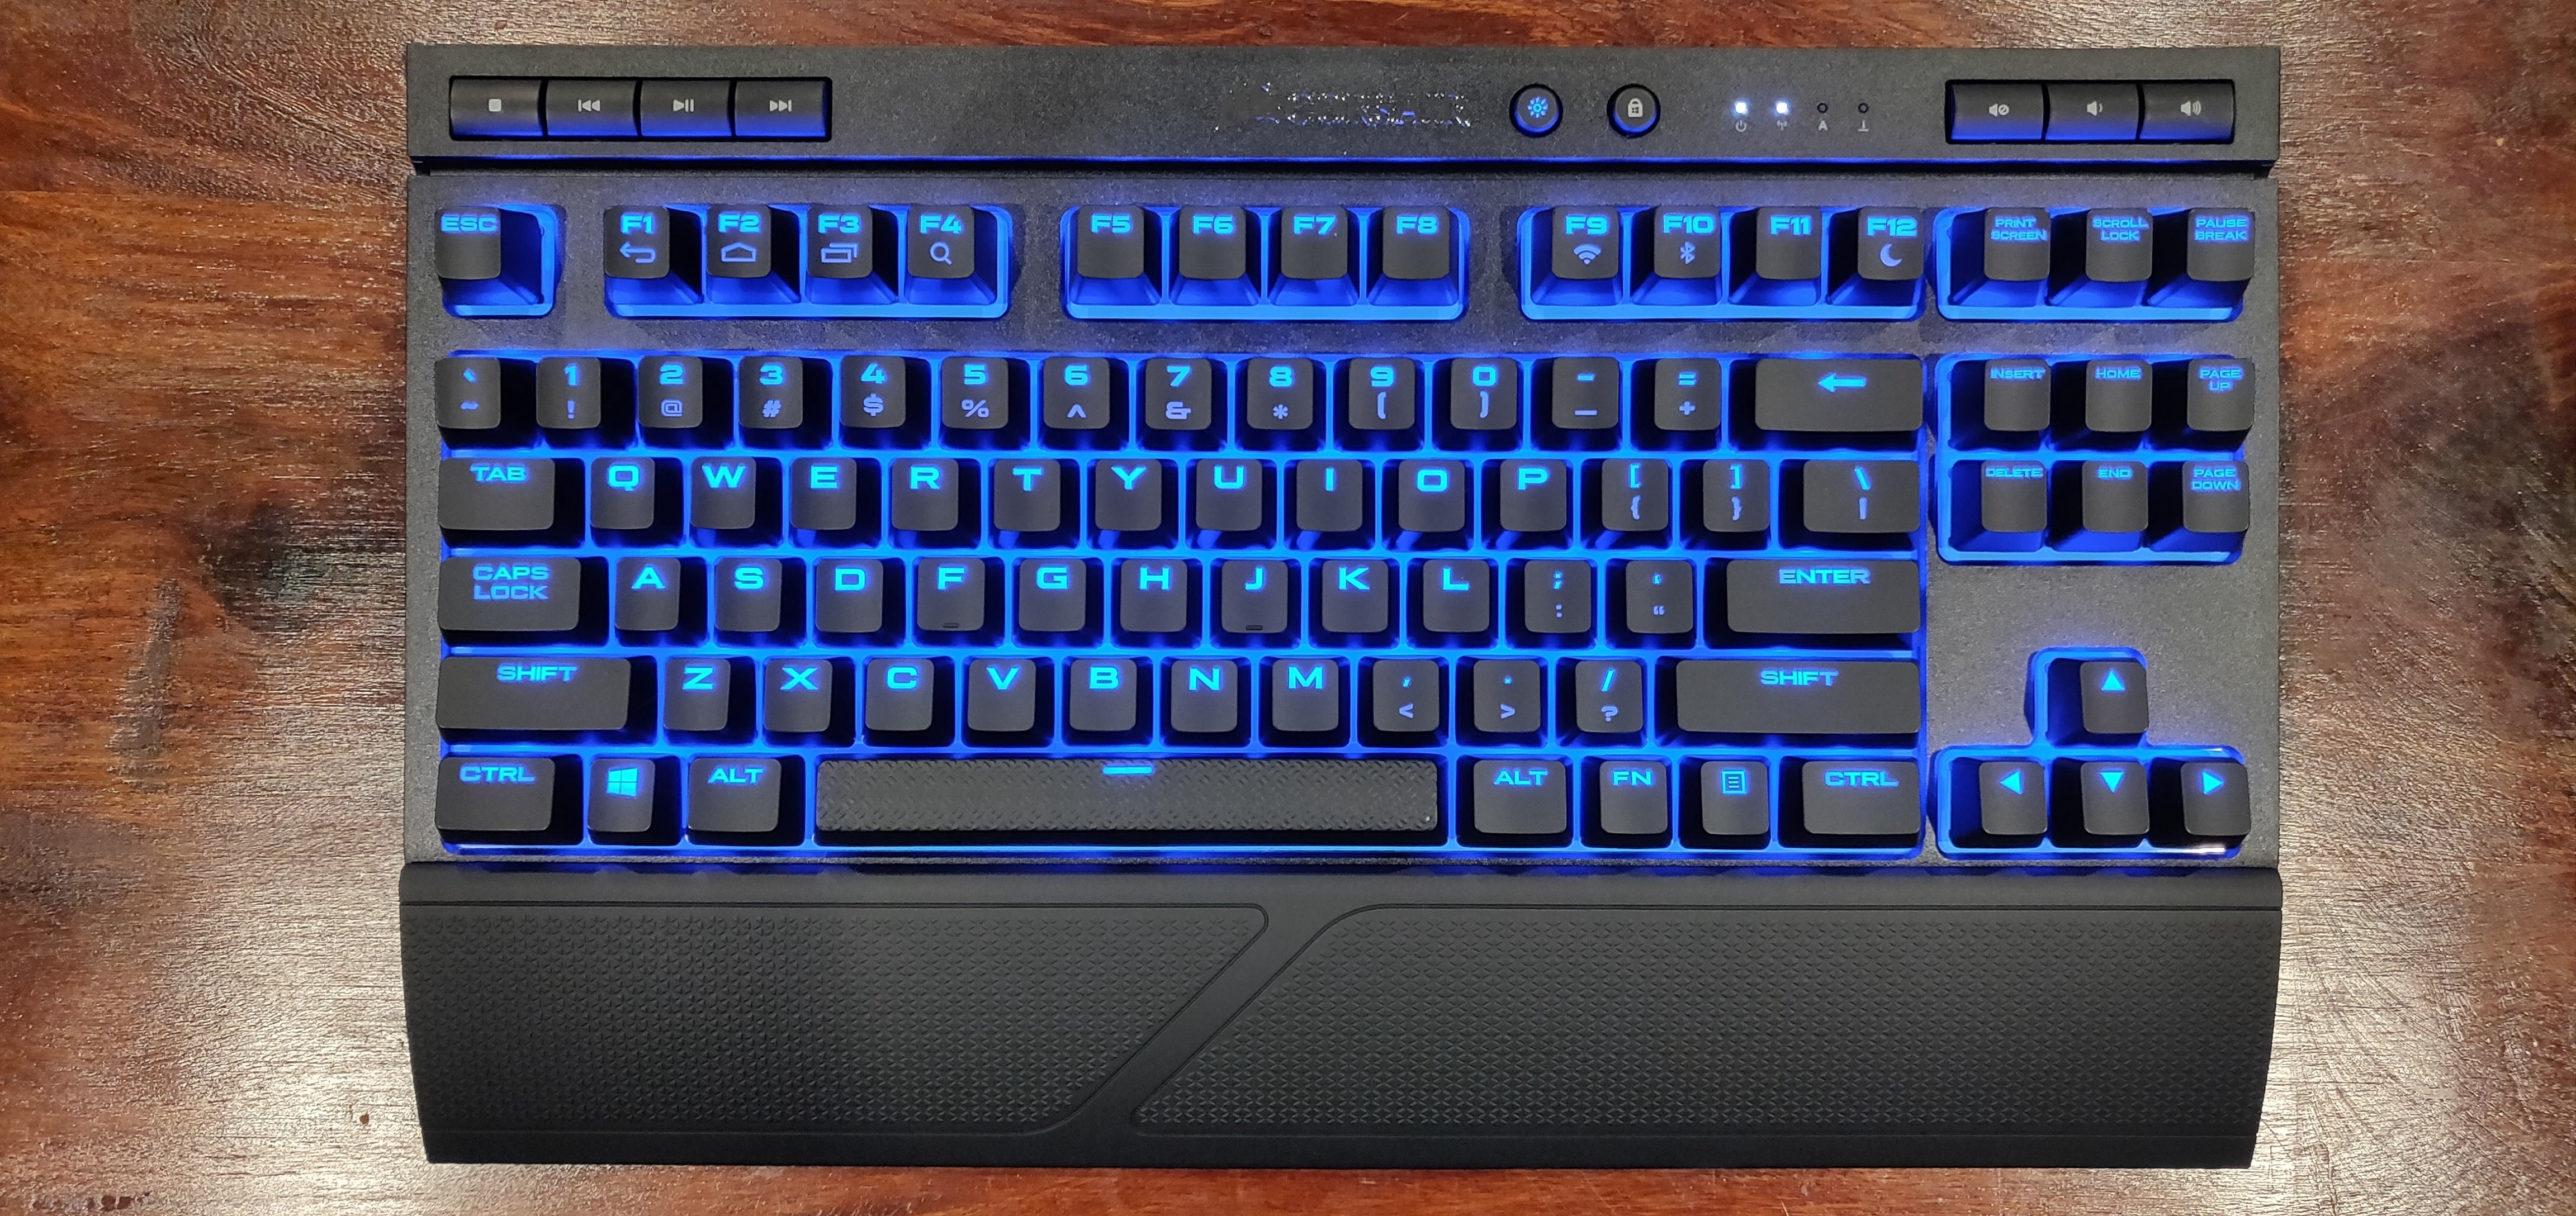 Corsair K63 review: A wireless, Cherry MX-based keyboard made for couch